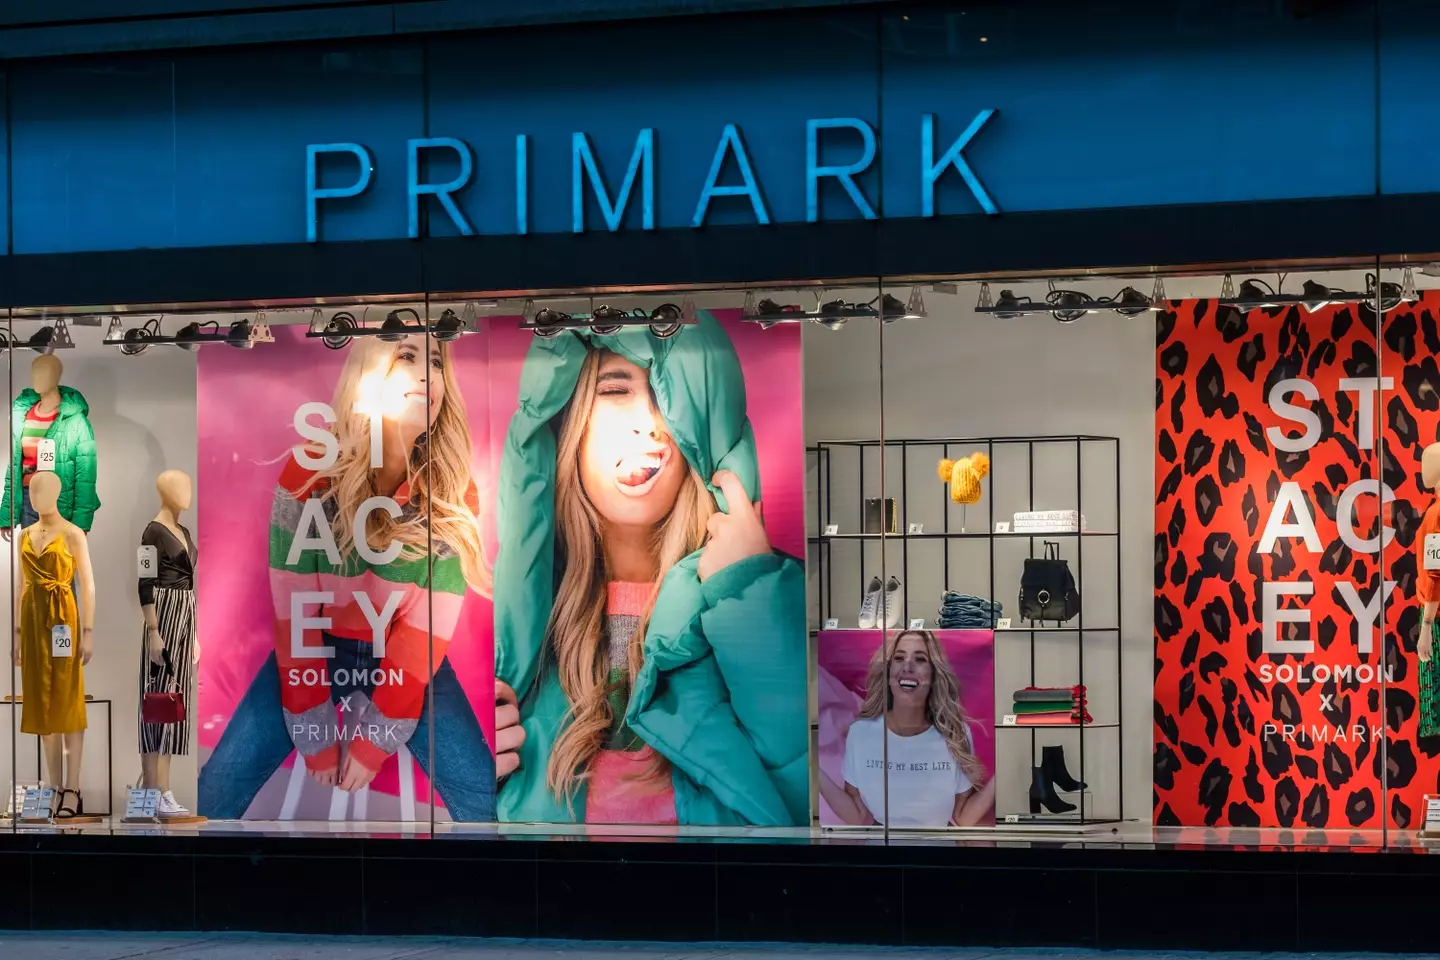 Primark is set to start selling some of its products online.